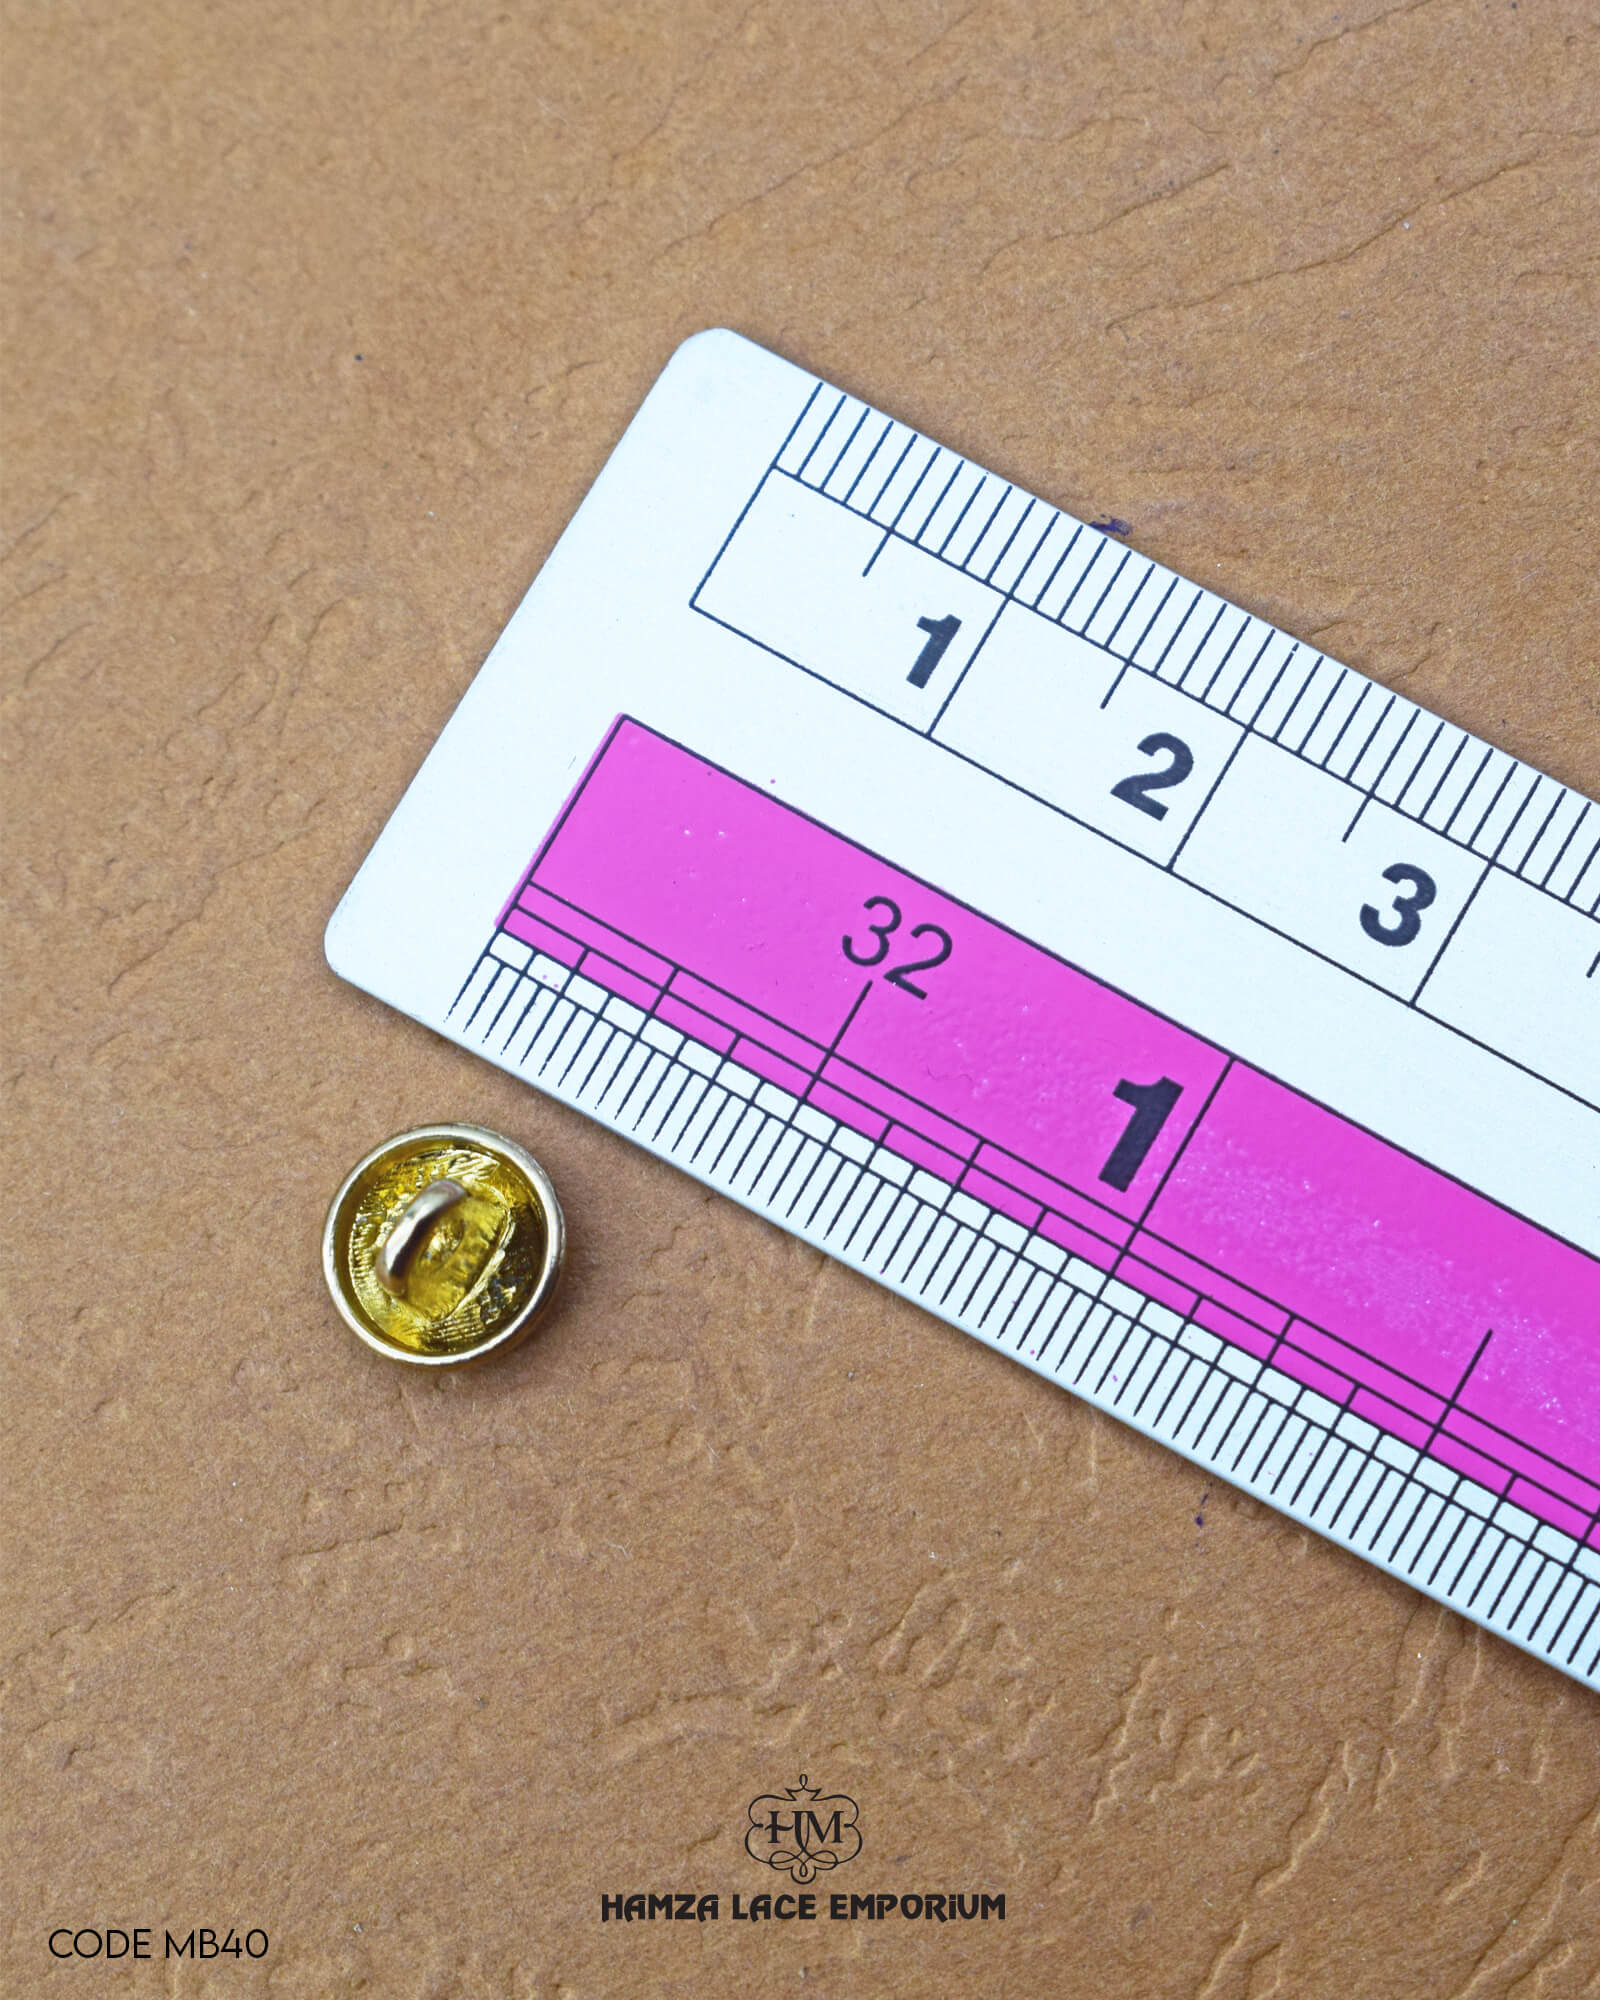 The dimensions of the 'Golden Metal Button MB40' are determined using a ruler.